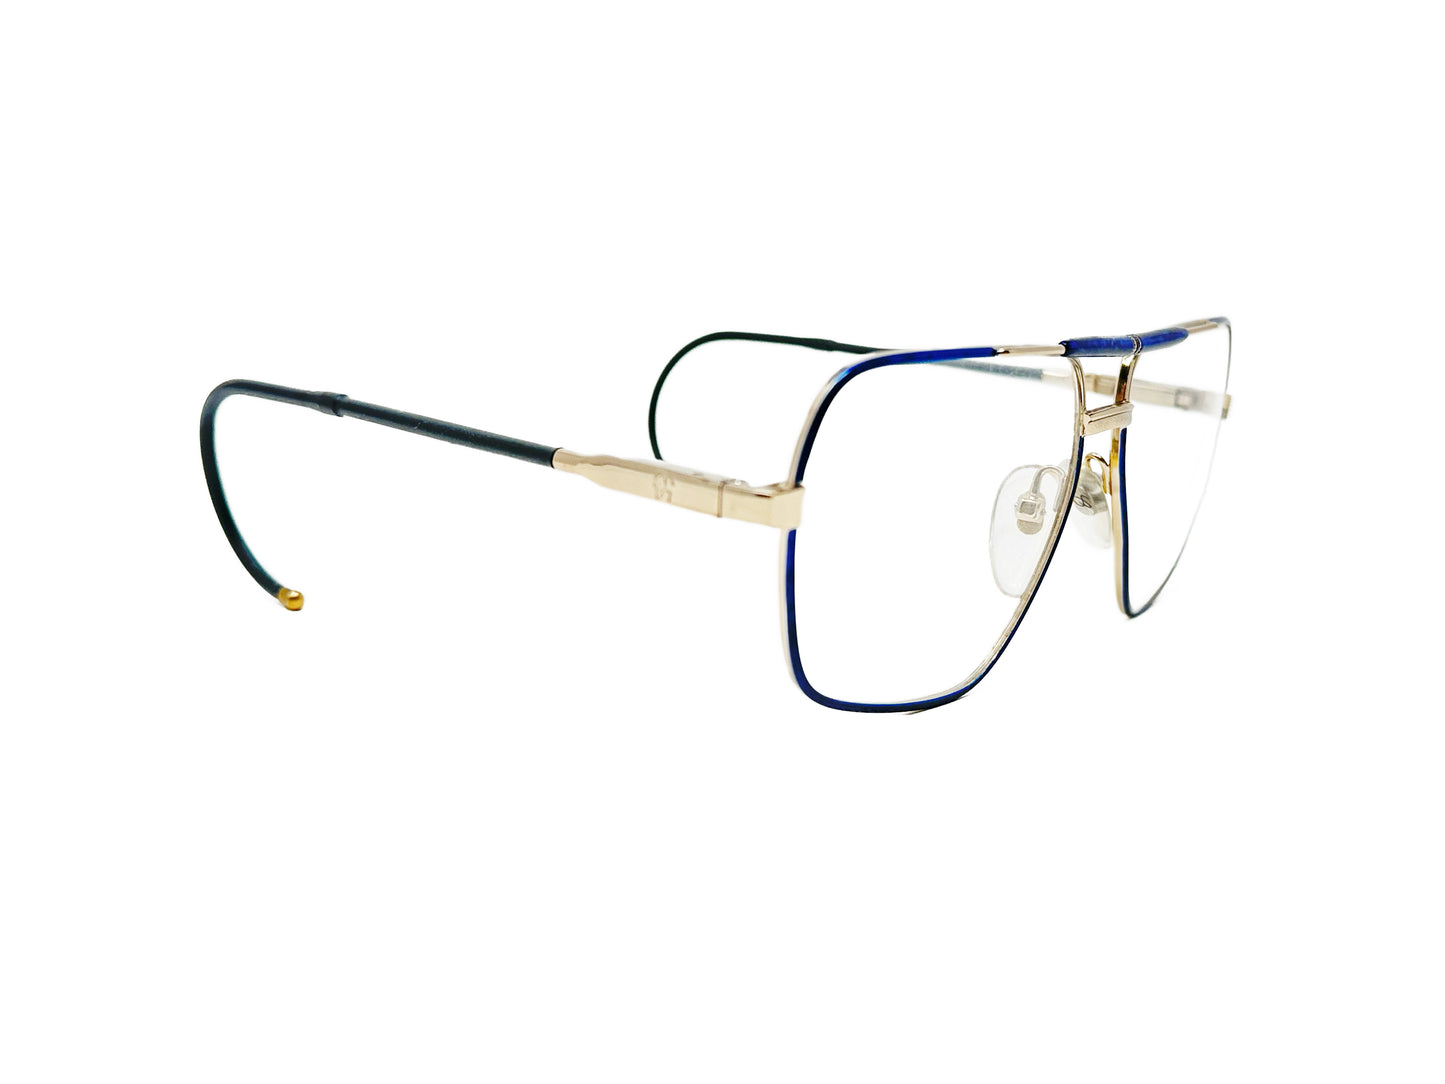 Zollitsch curved aviator-style optical frame. Model: 526. Color: 2 - Navy blue and gold accents and cable temples. Side view.